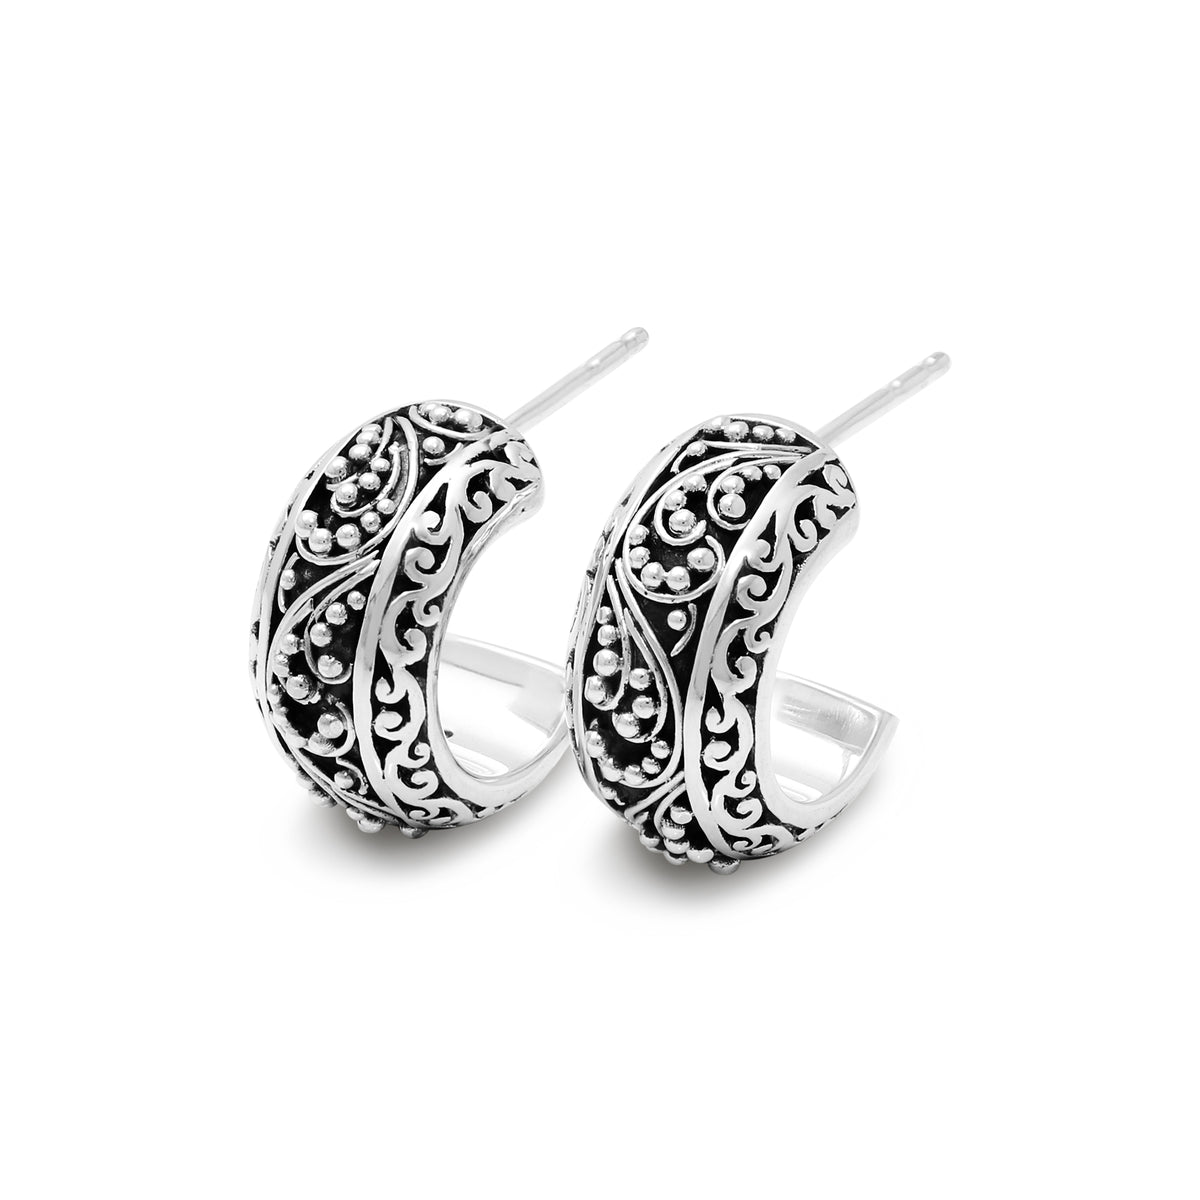 Carved Signature Scroll Granulated Classic Hoop Earrings. 8mm W x  diameter 9mm